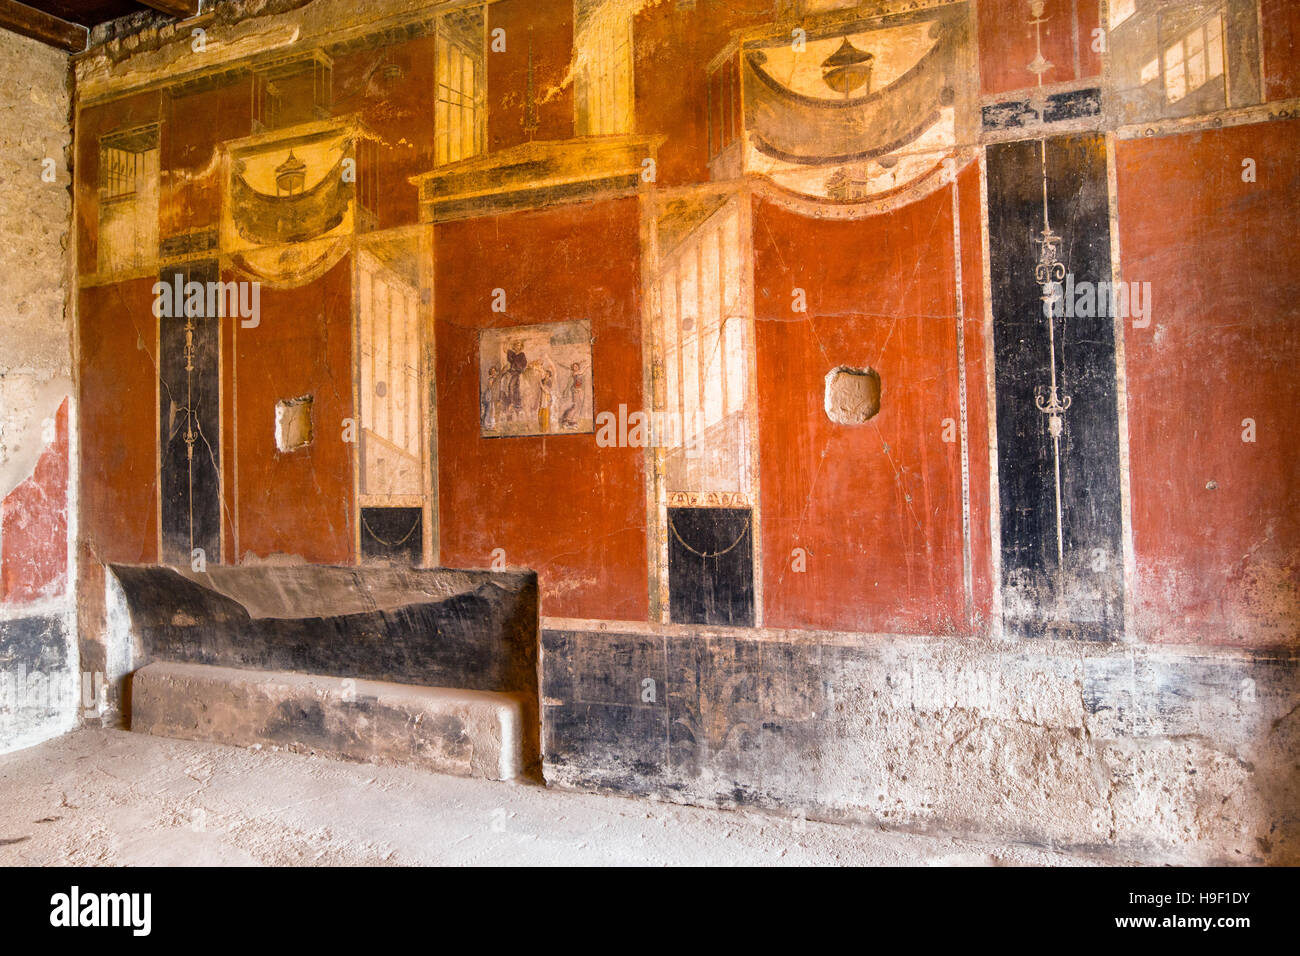 Ancient painted wall frescoes at the ancient Roman city of Pompei. Campania, Italy Stock Photo